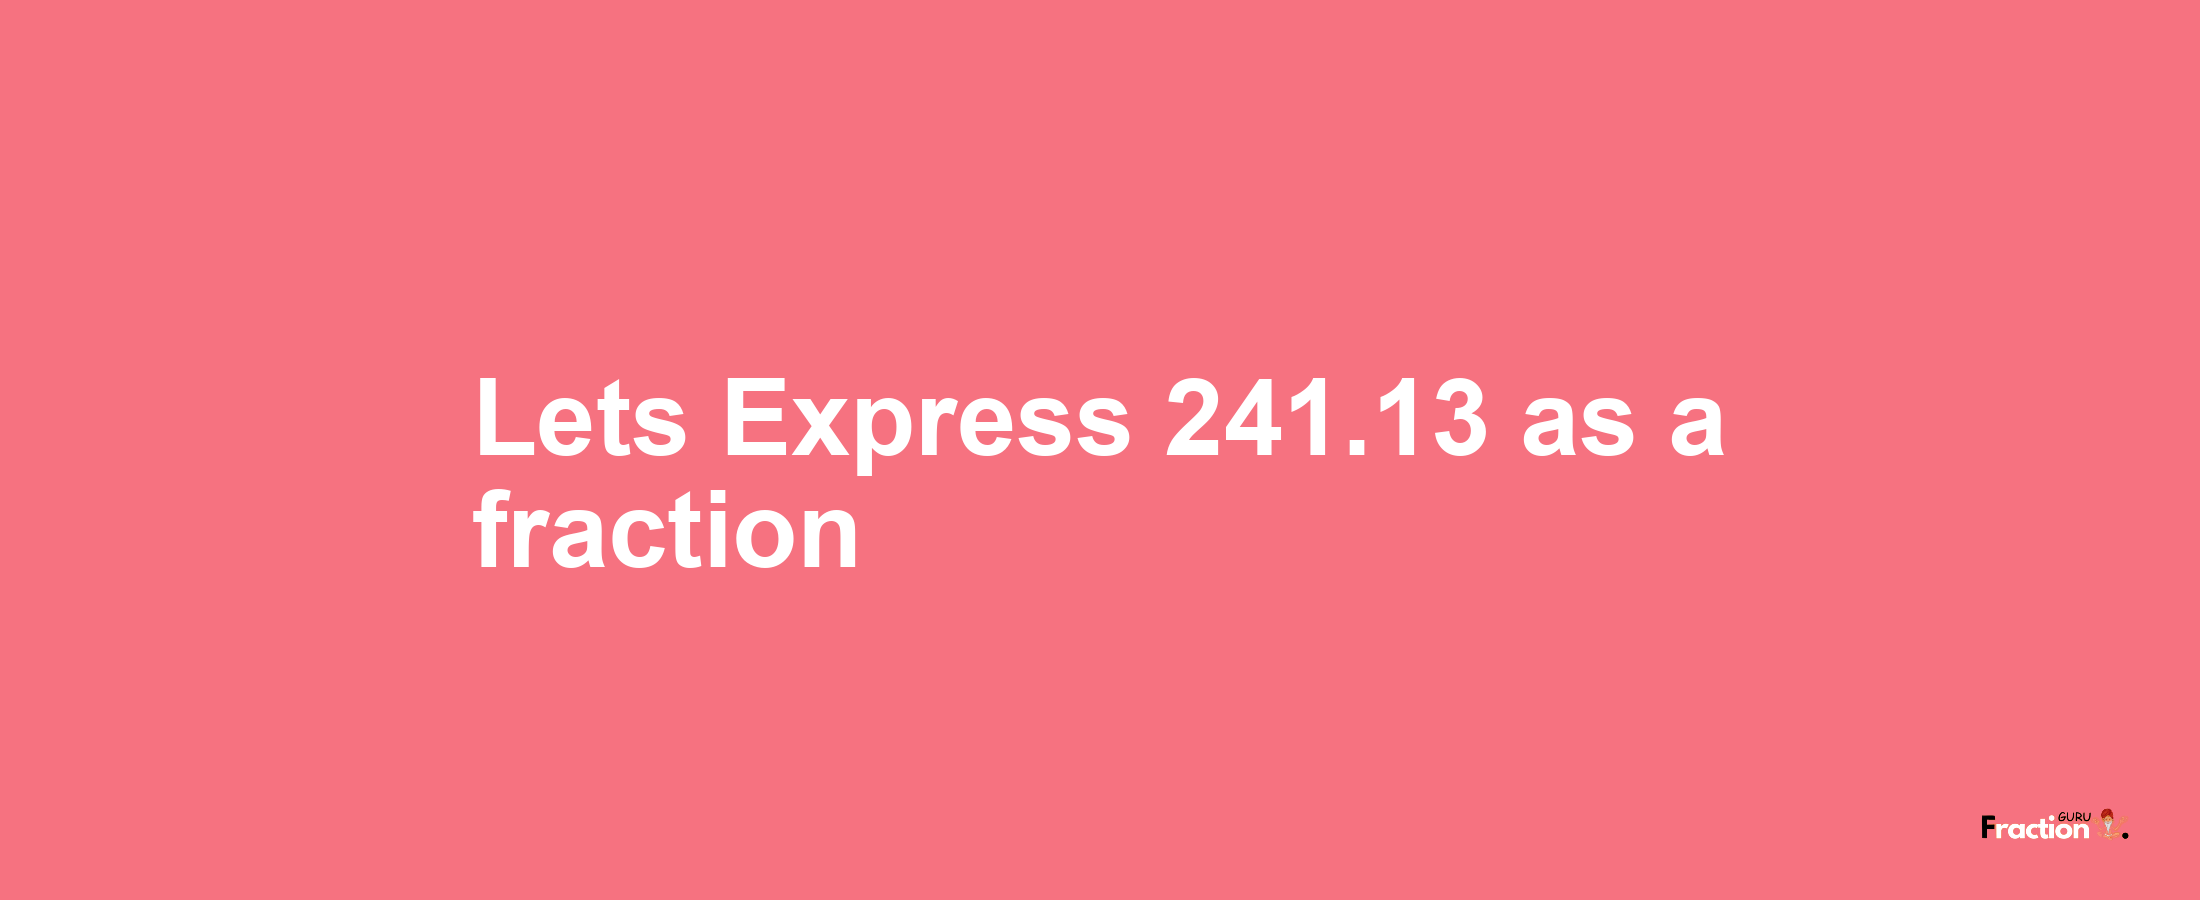 Lets Express 241.13 as afraction